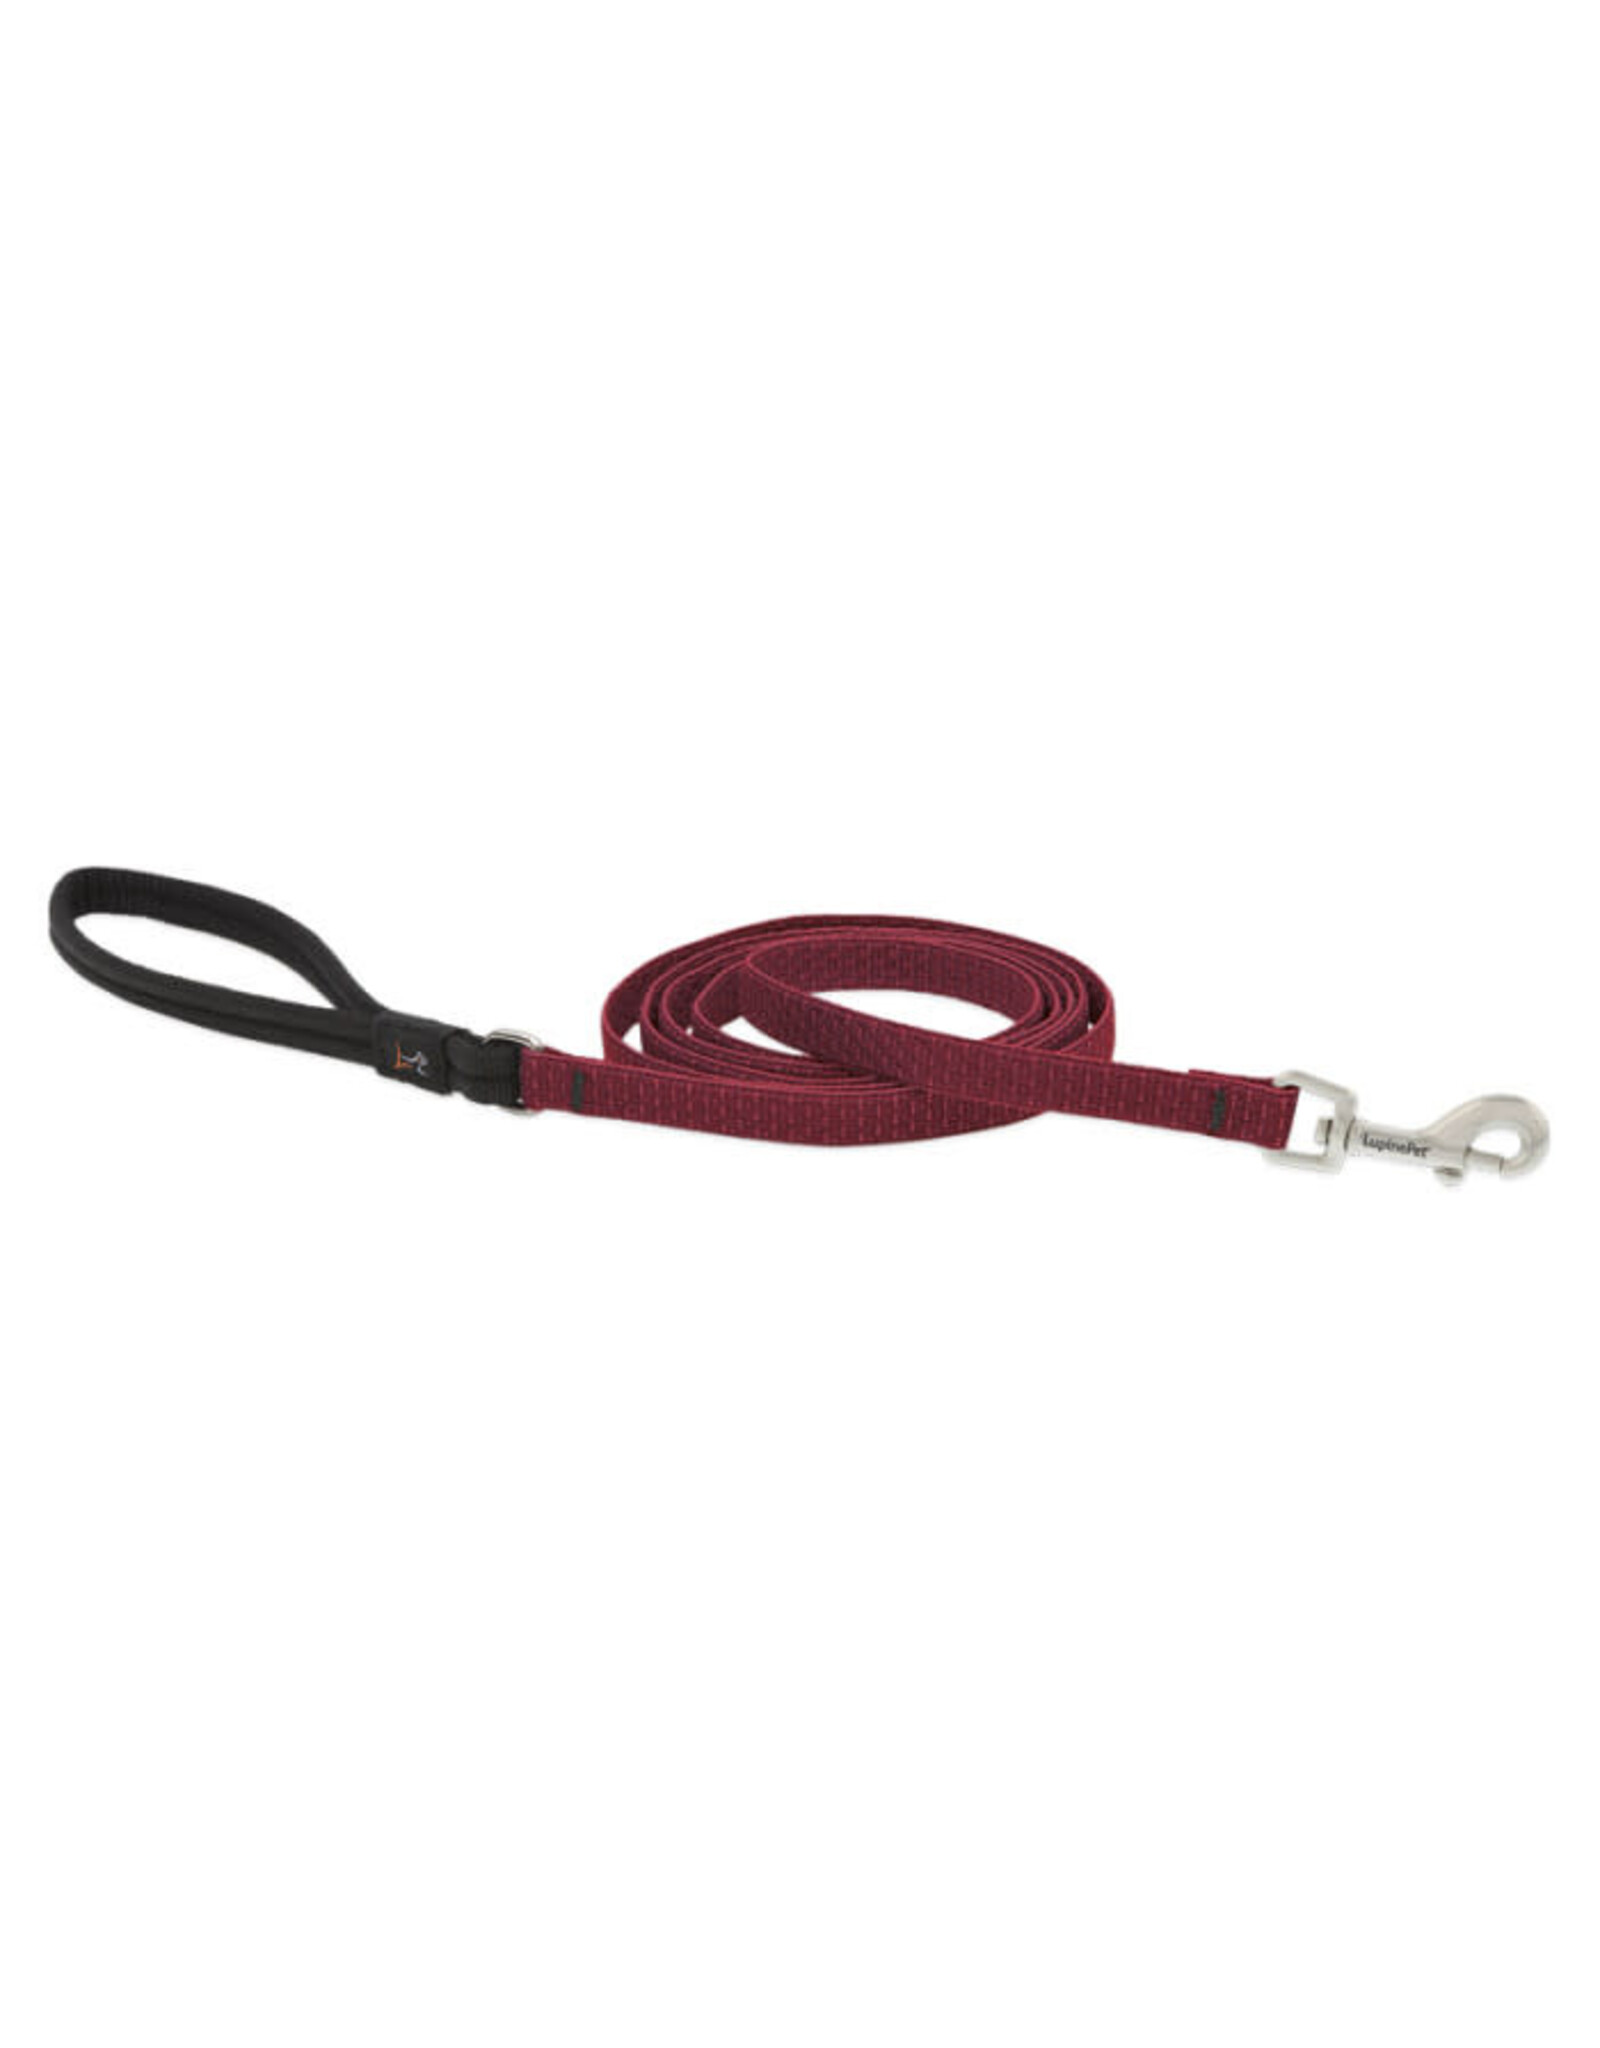 LUPINE LUPINE 1IN BERRY LEASH 6FT